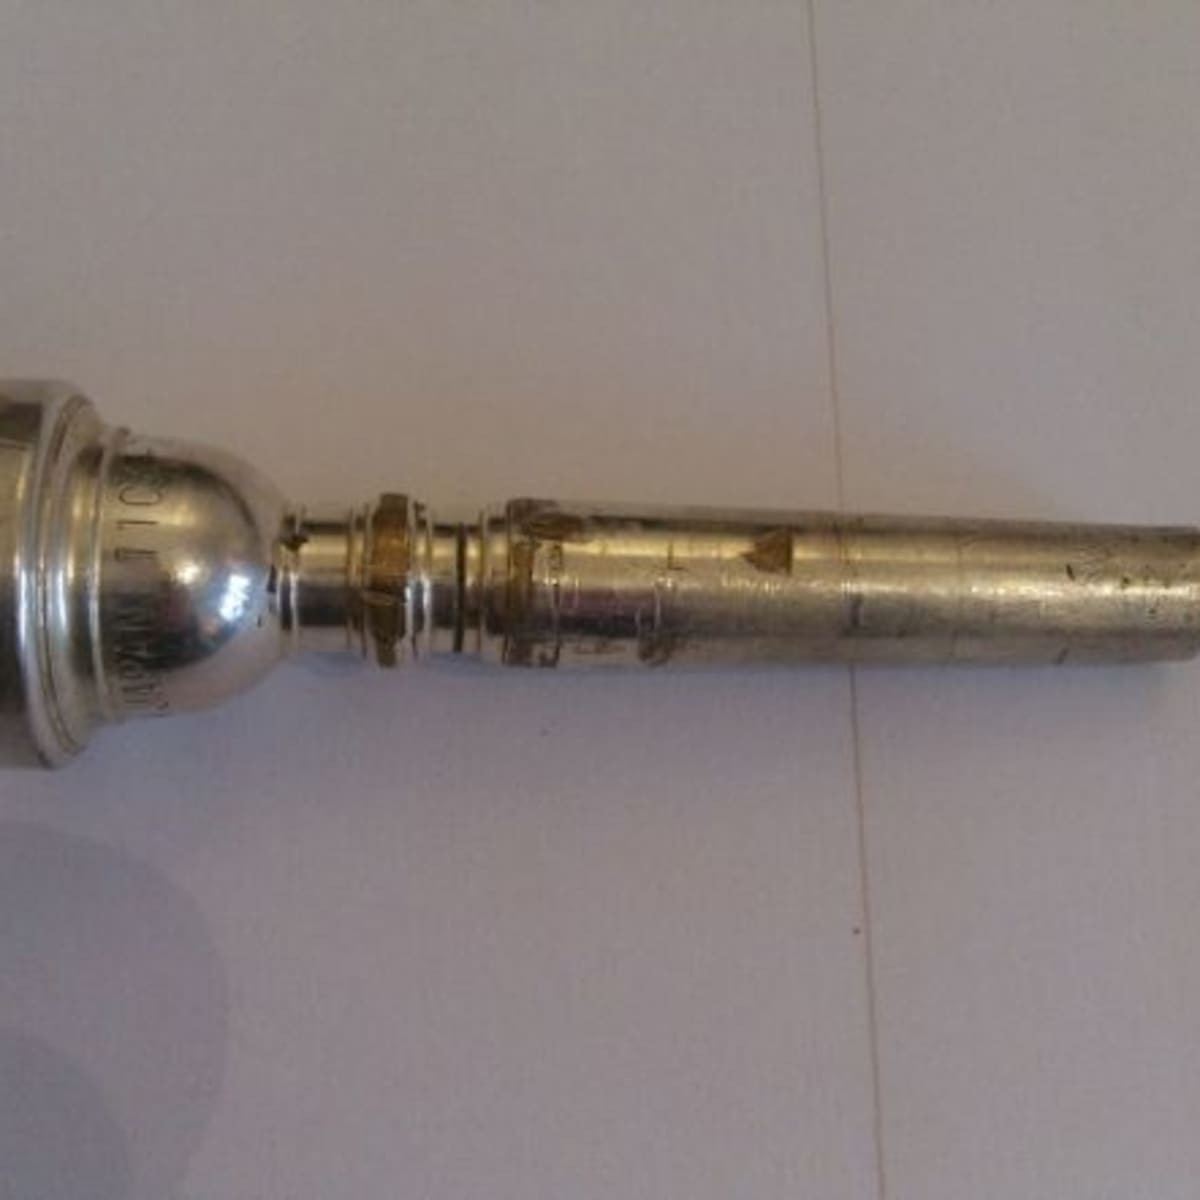 How to fix a stuck trumpet mouthpiece